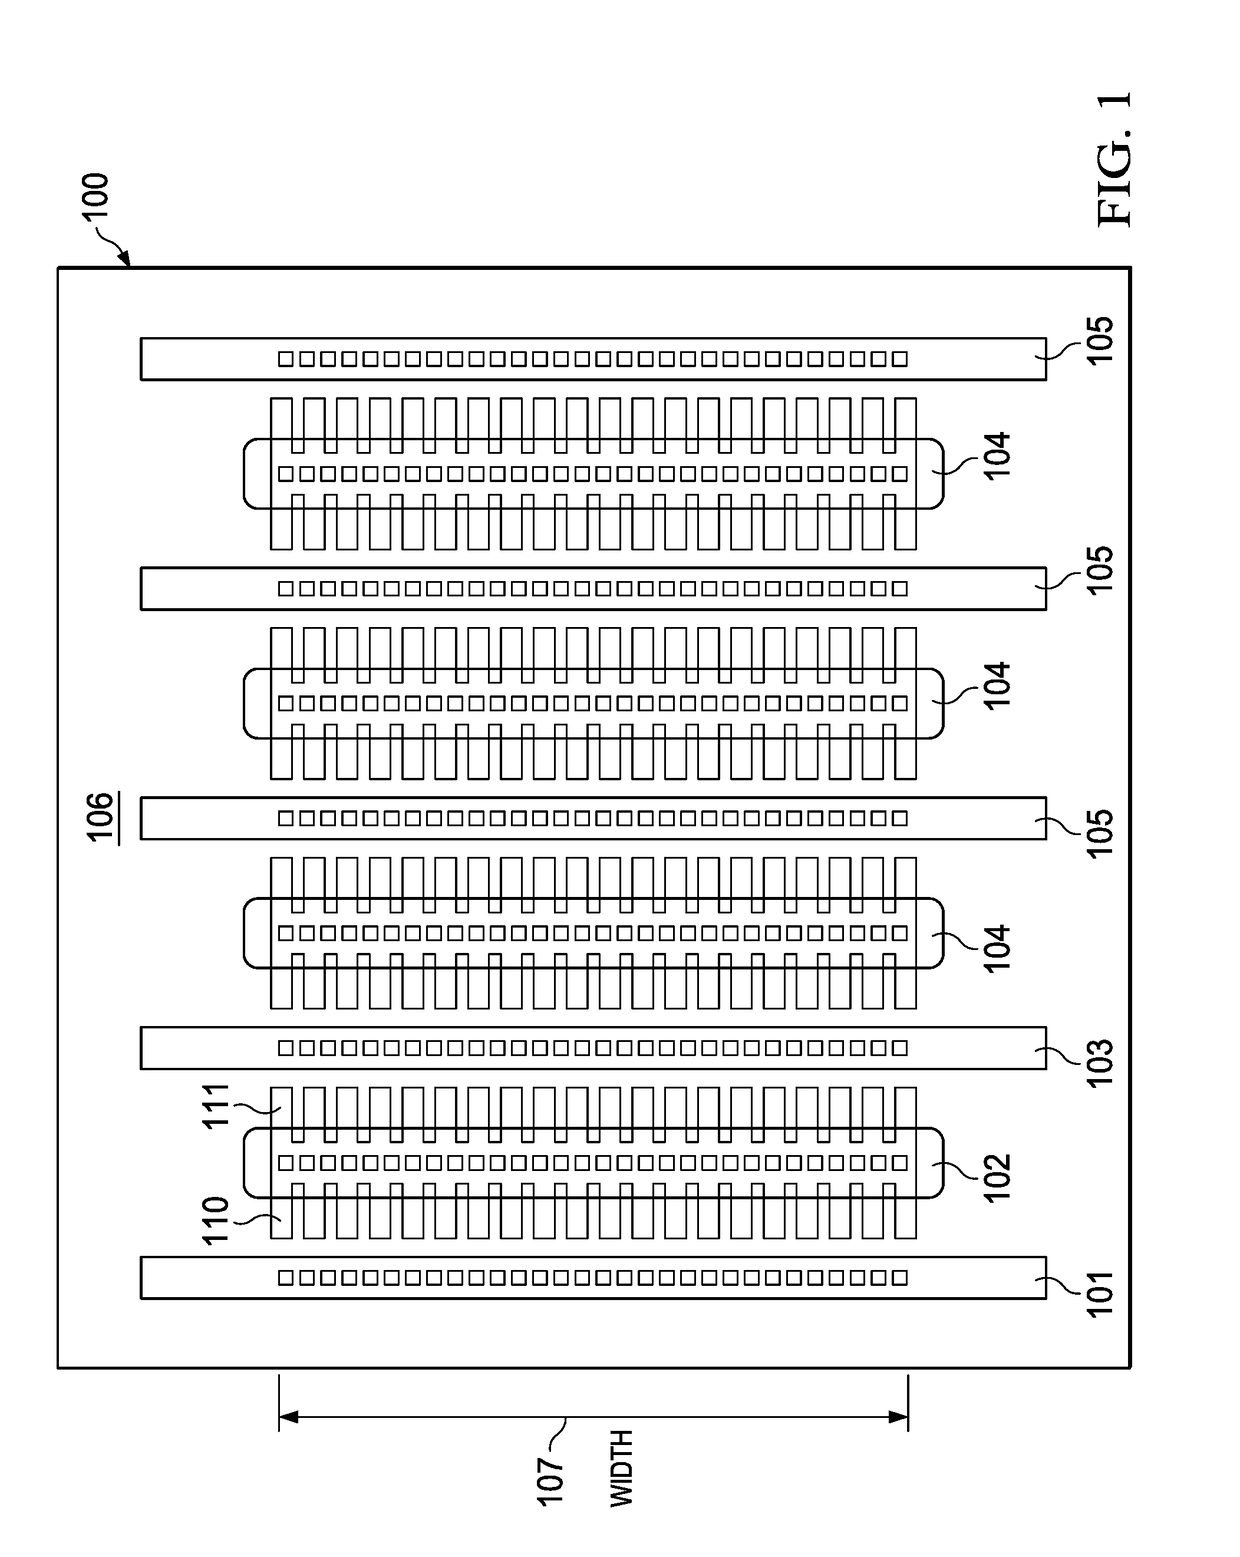 LDMOS Transistor with Segmented Gate Dielectric Layer